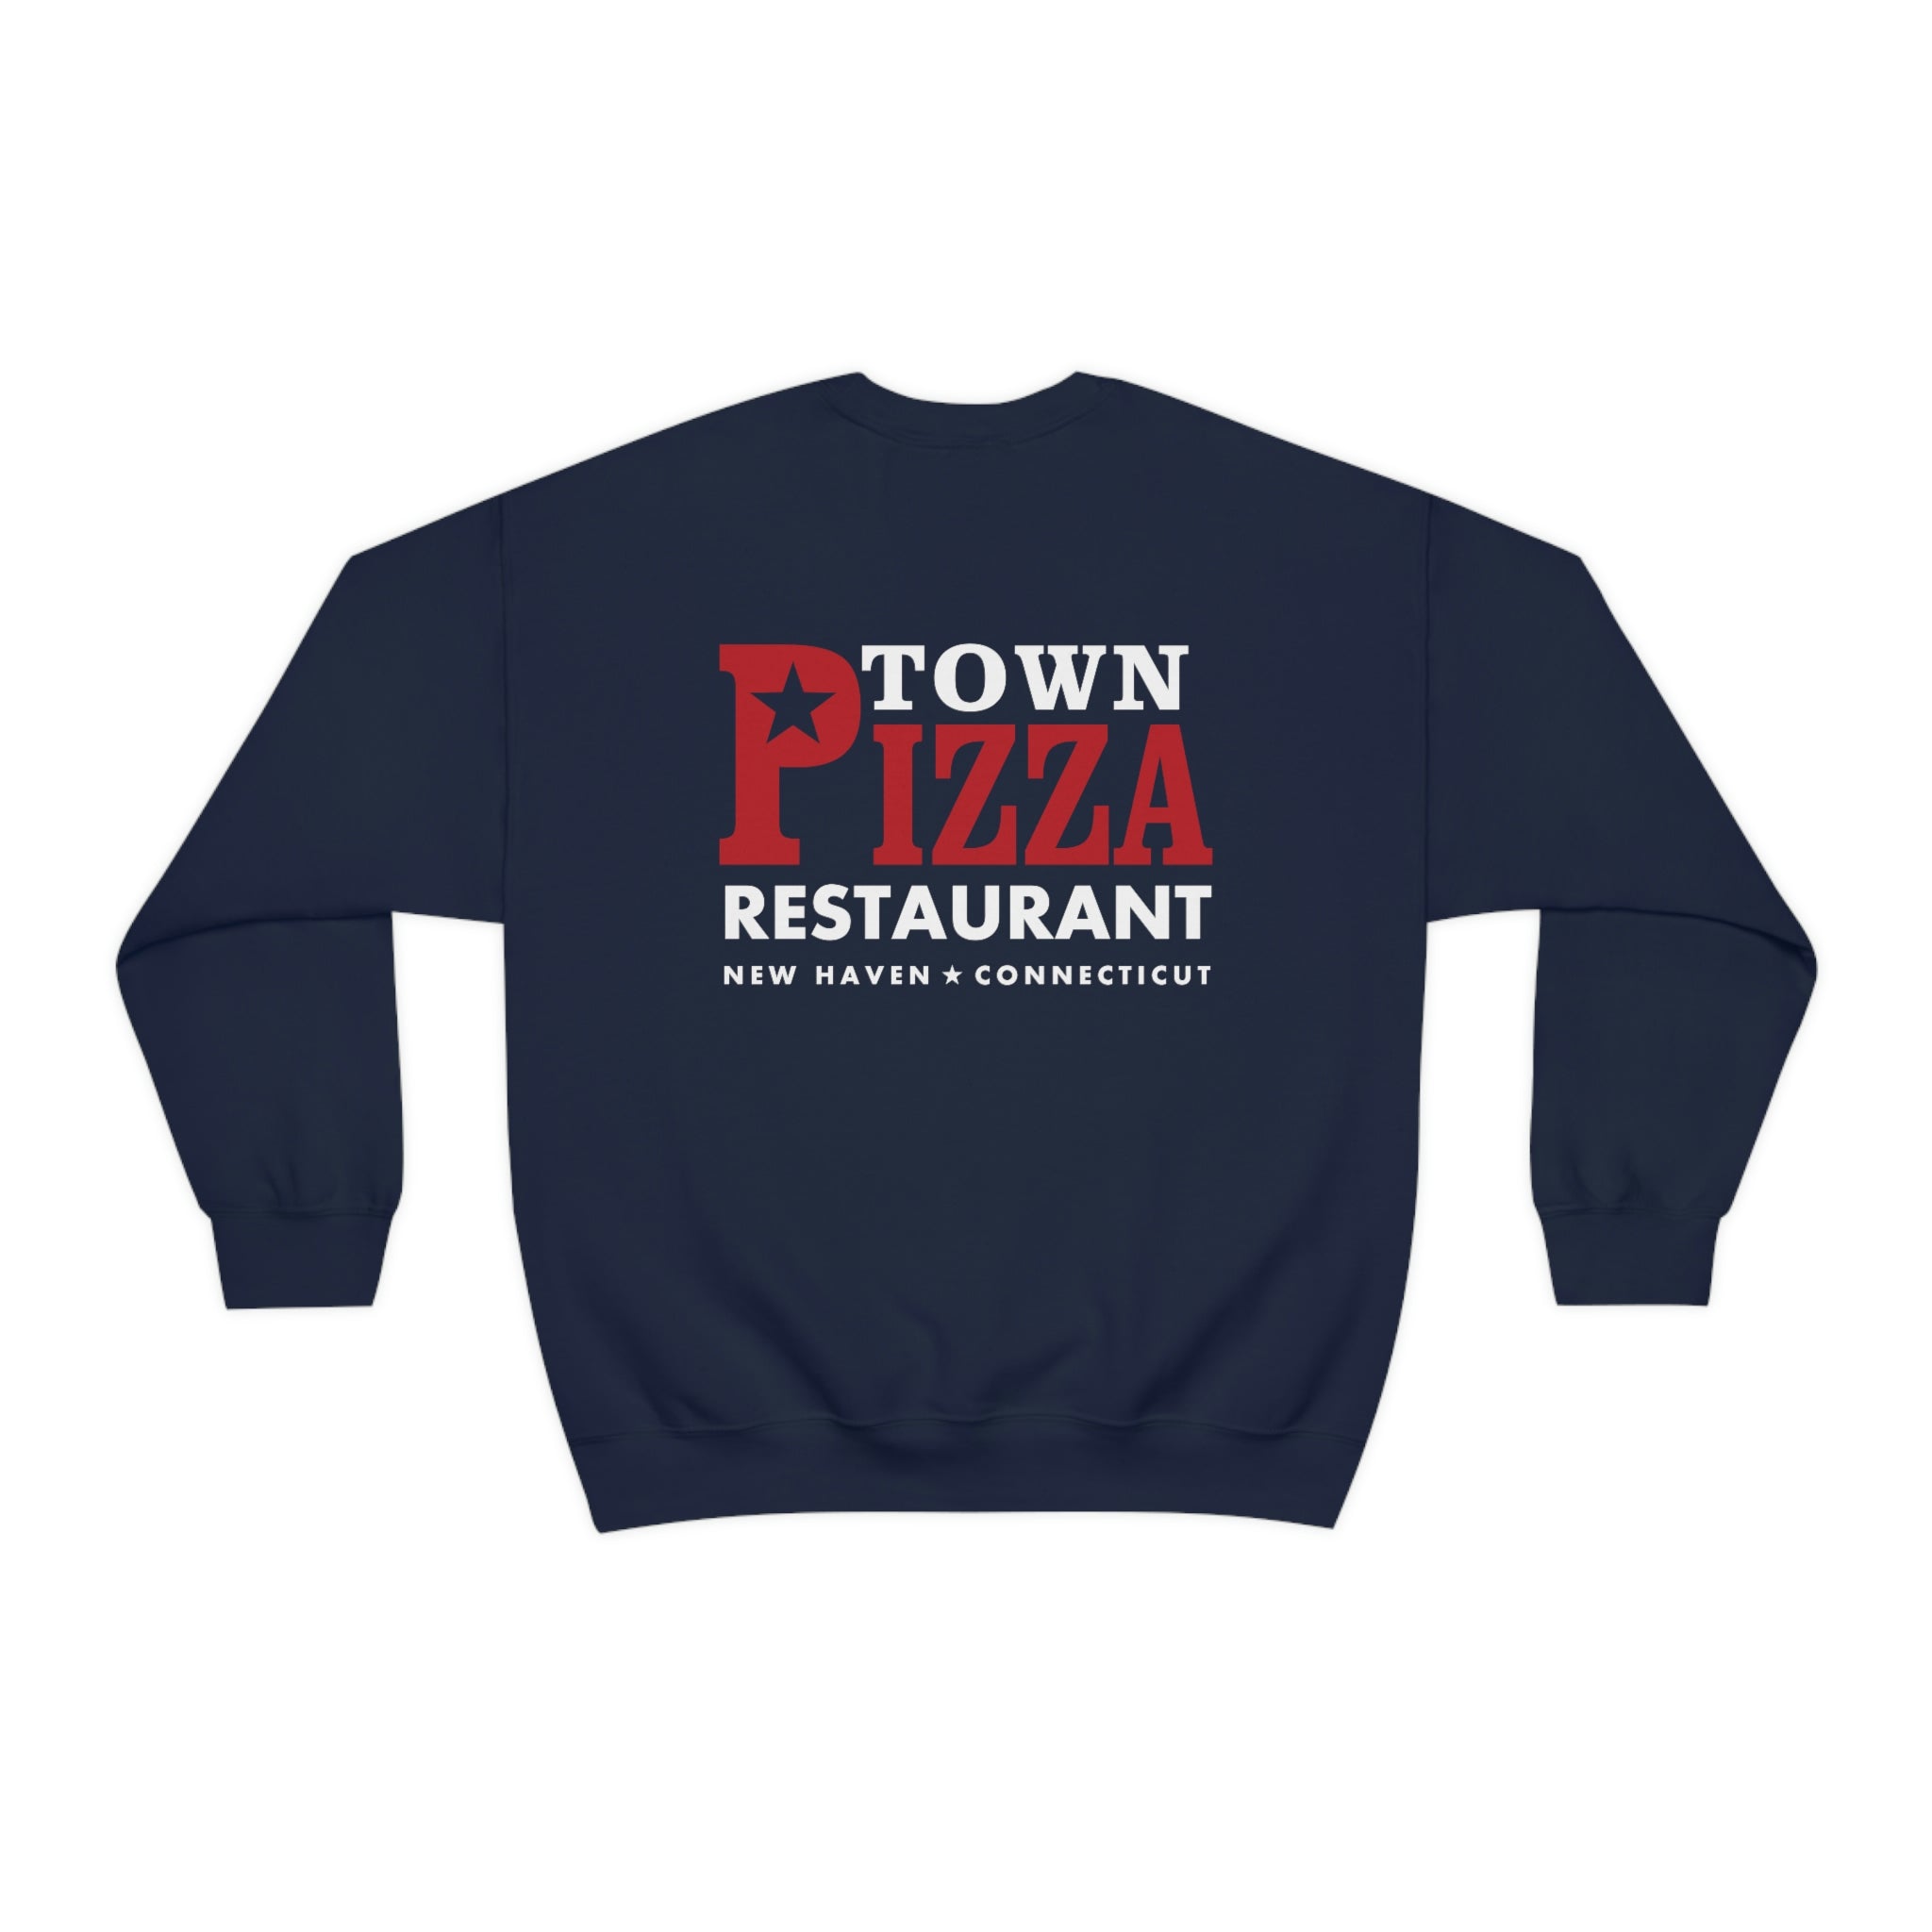 Town Pizza Iconic Sweatshirt in Blue